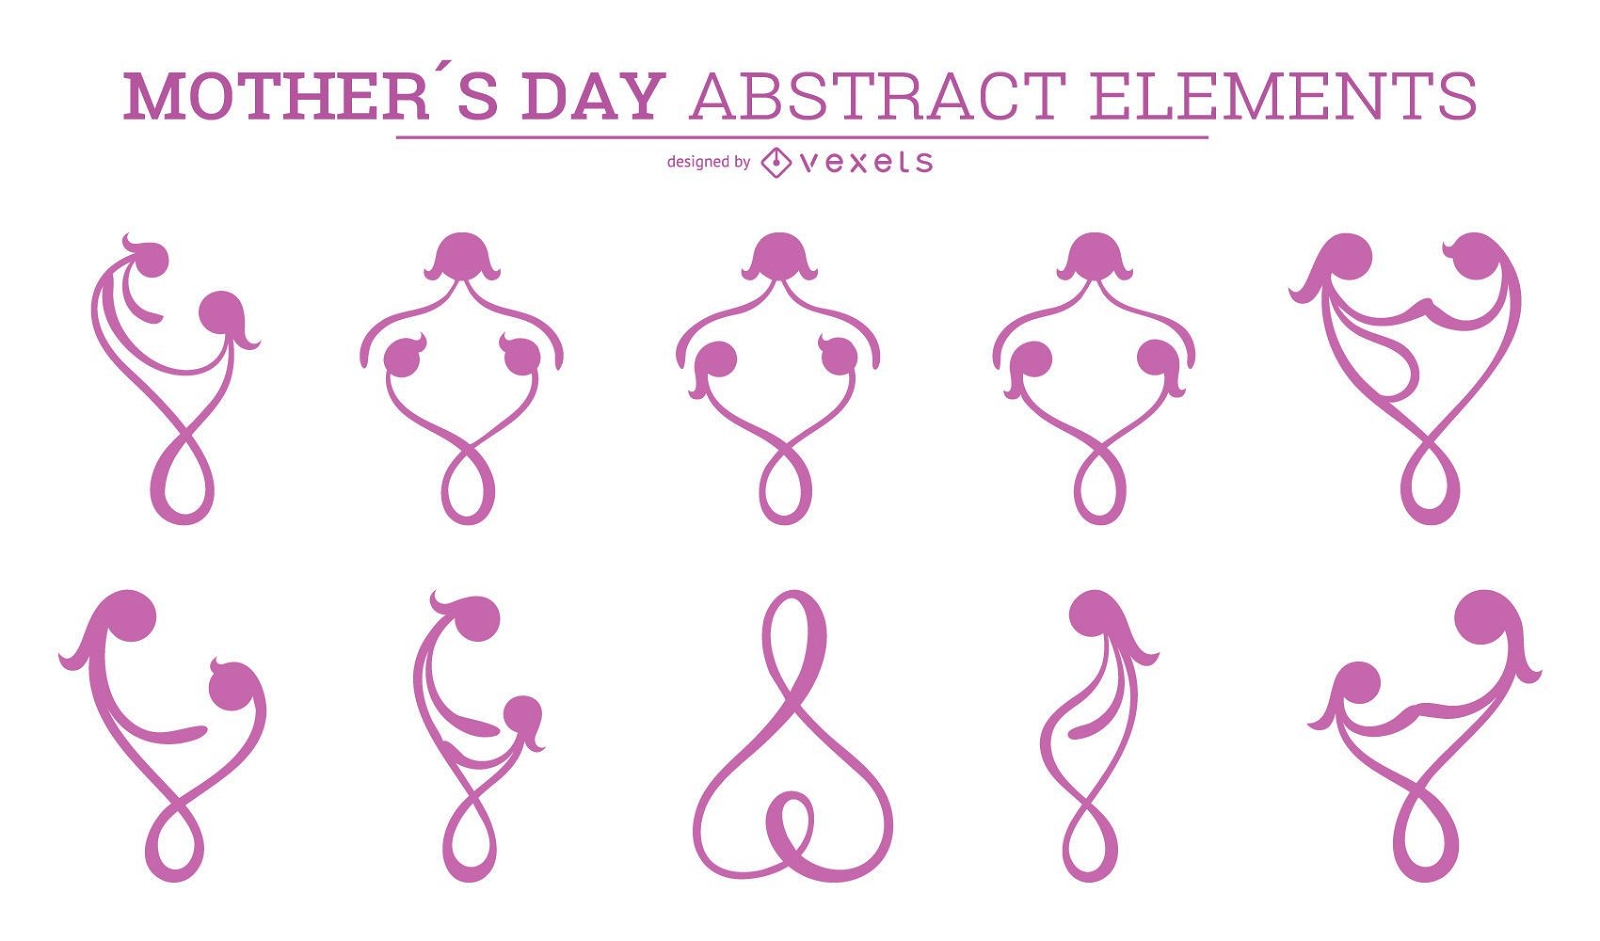 Mother's Day Abstract Elements Pack